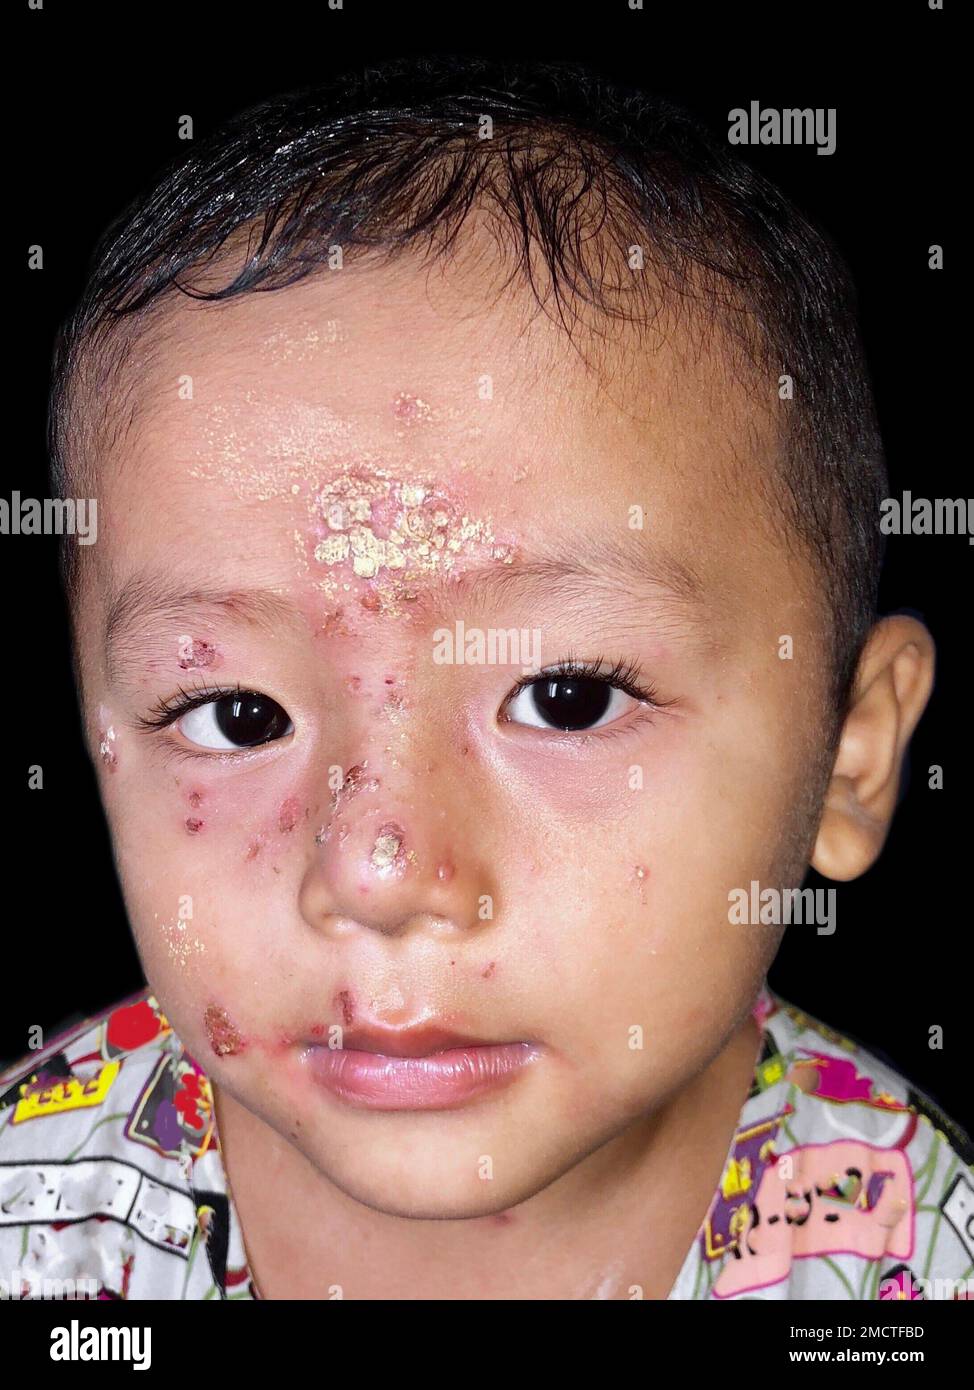 Staphylococcal Skin Infection Called Impetigo Around The Mouth Of Asian